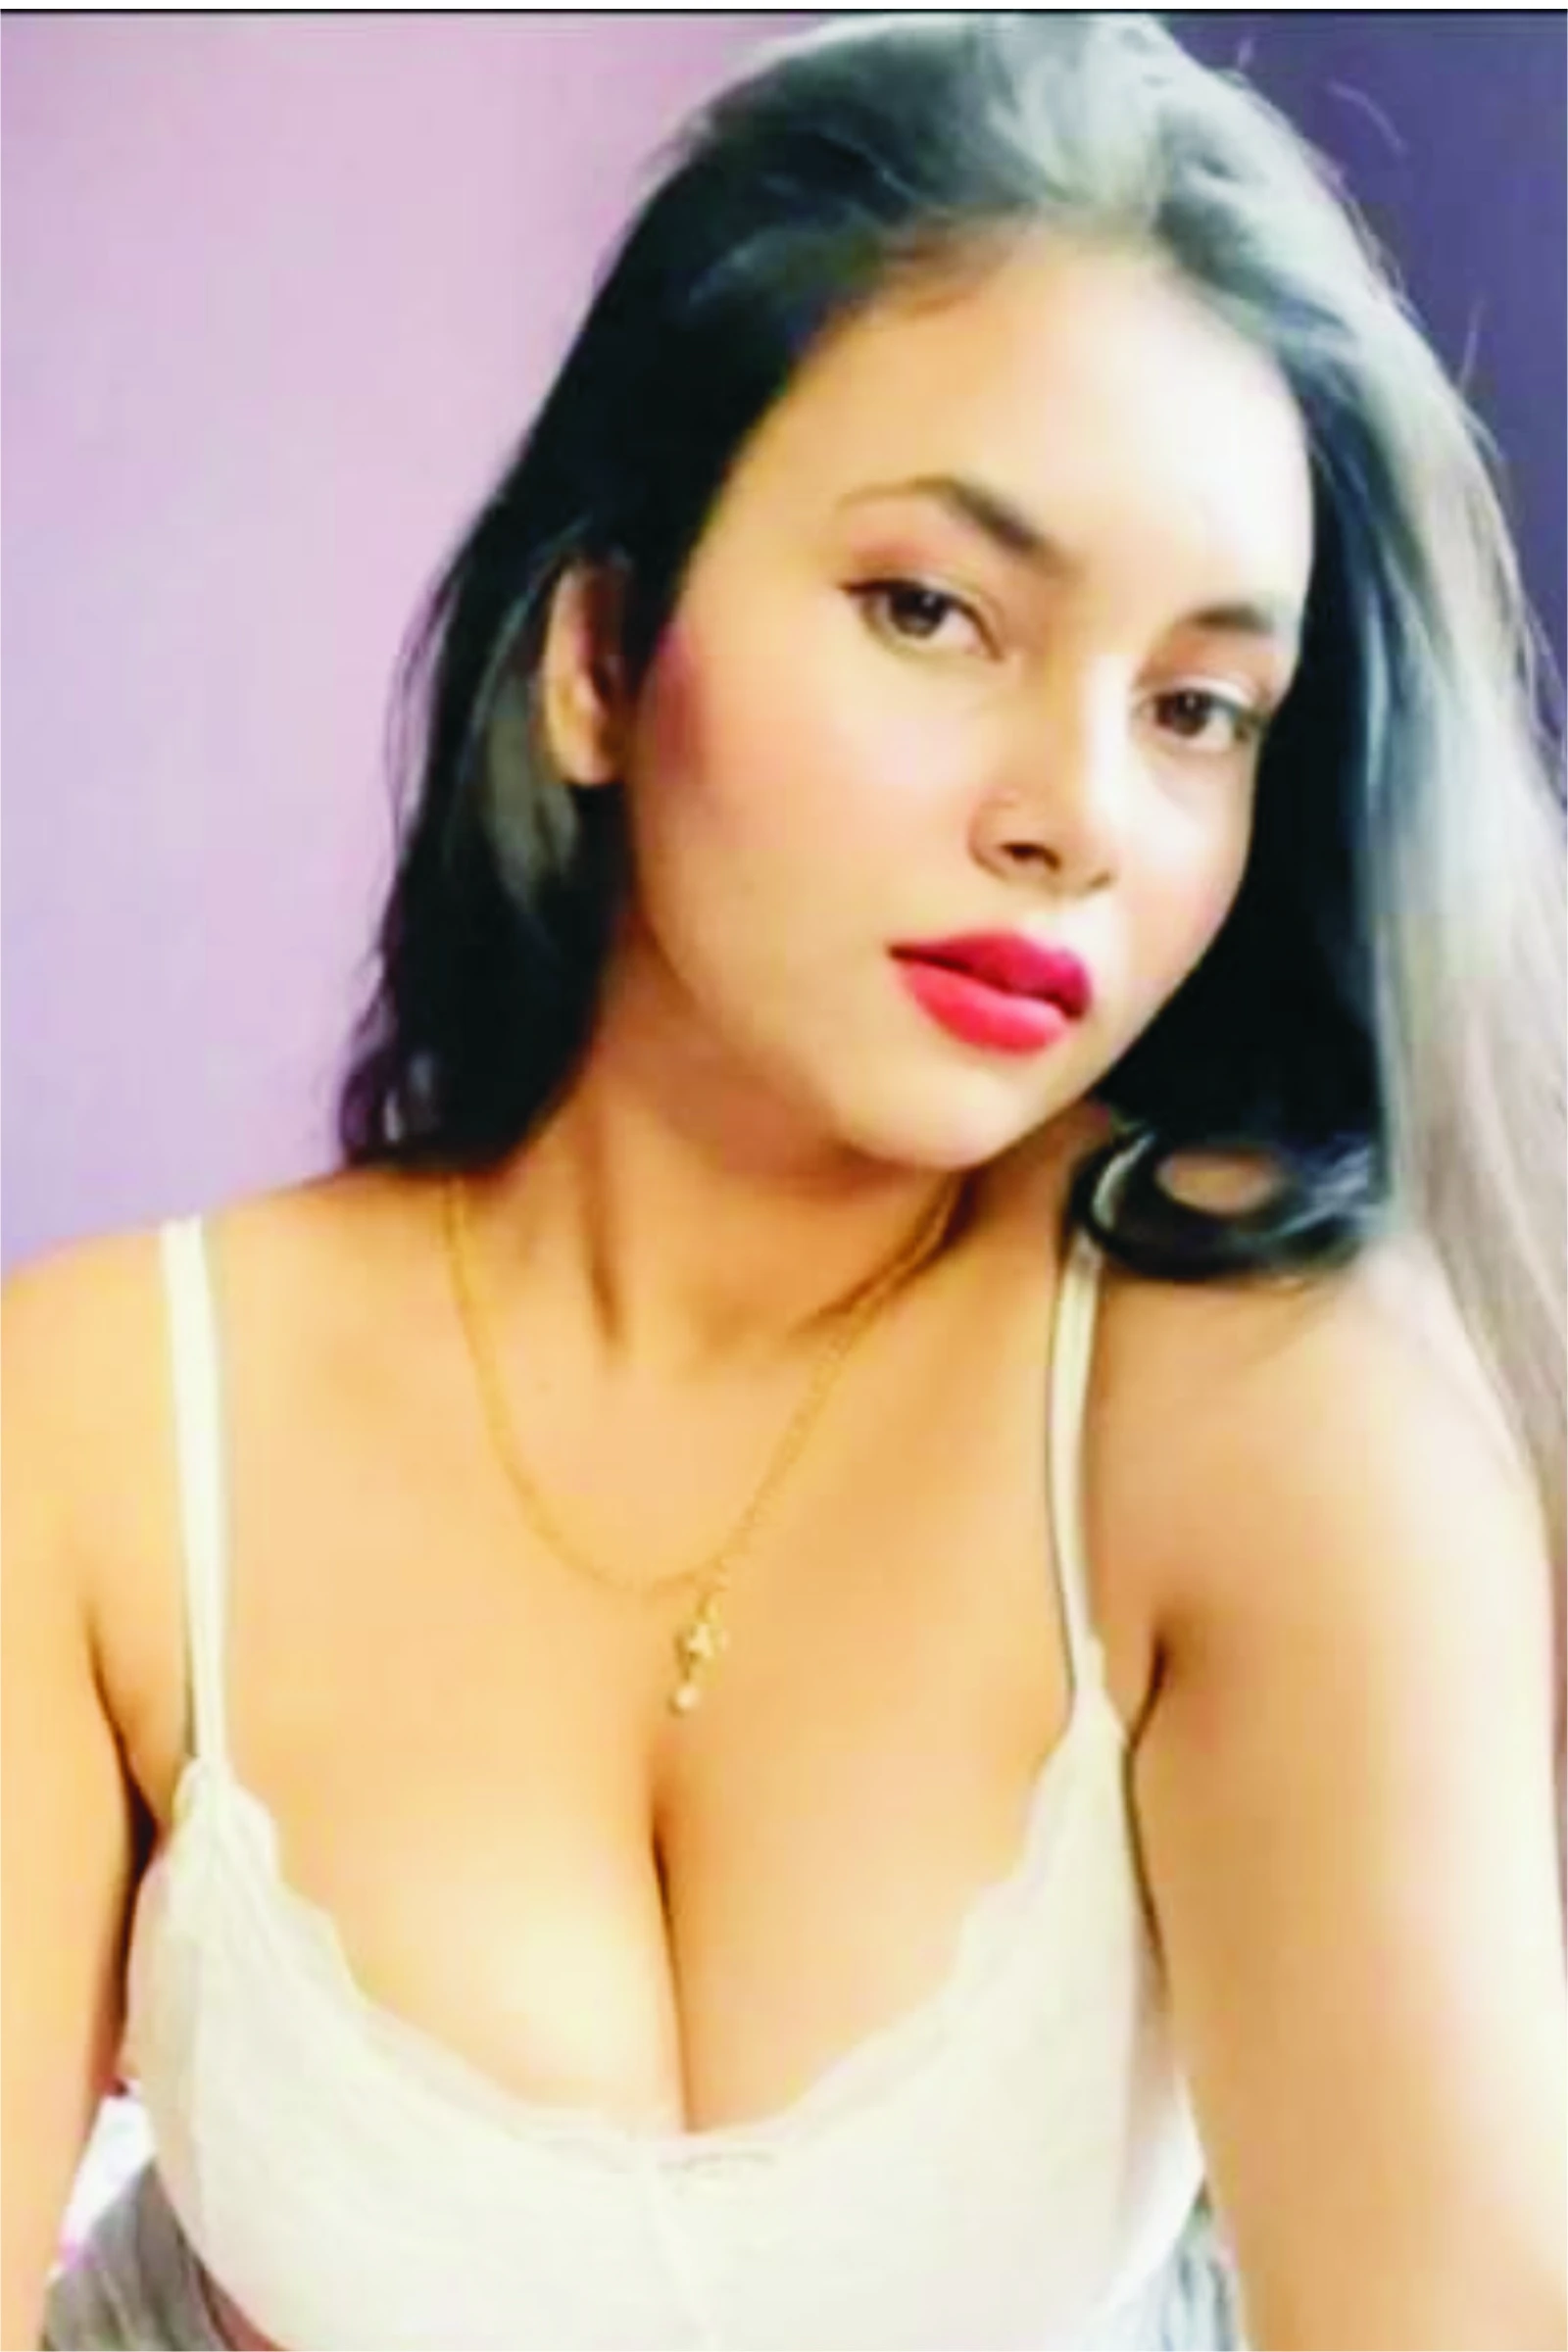 Housewife Delhi Call Girls For Friendship with WhatsApp Number